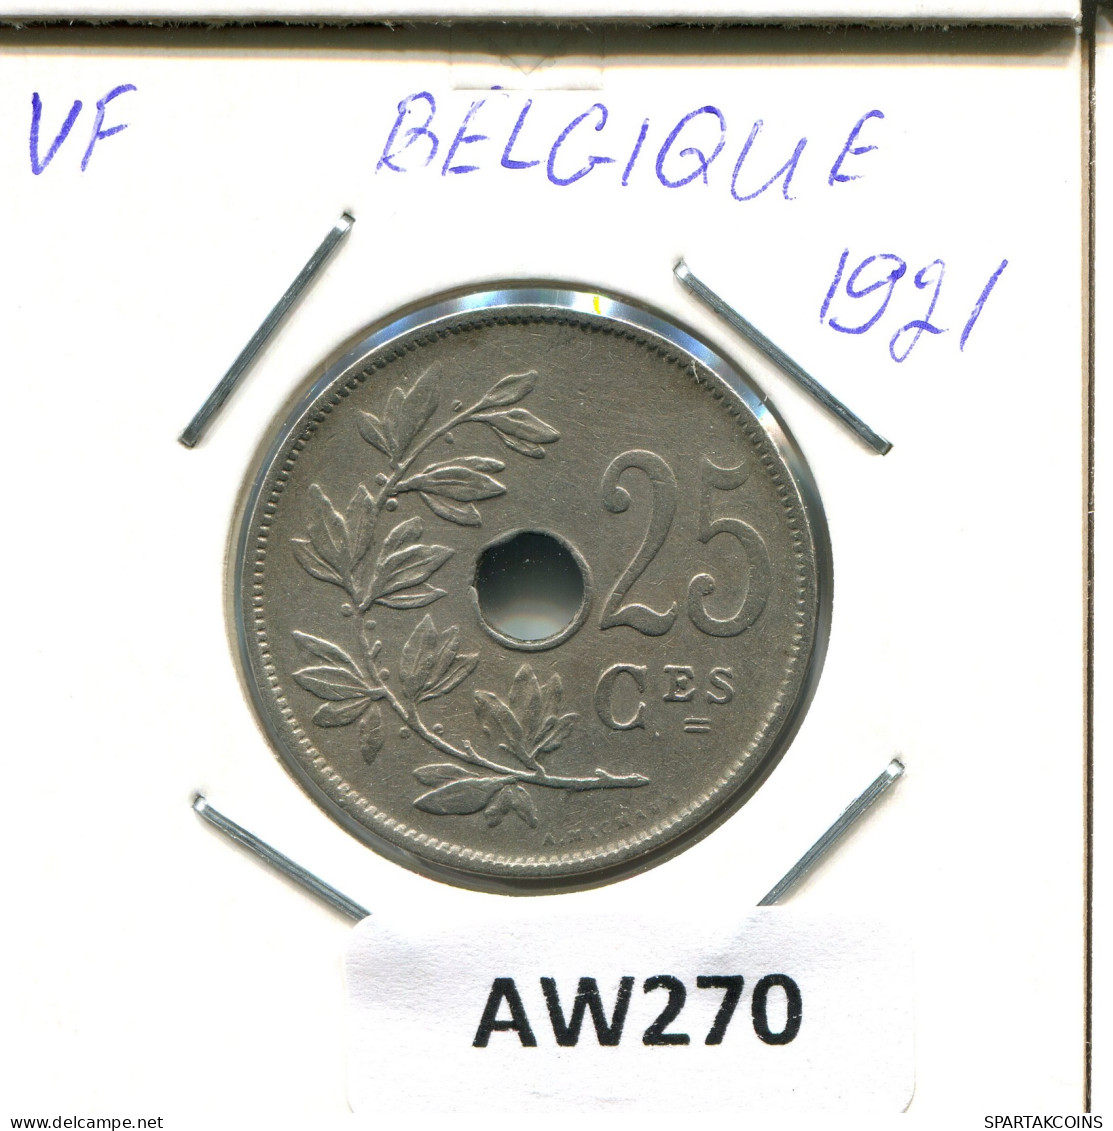 25 CENTIMES 1921 FRENCH Text BELGIUM Coin #AW270.U - 25 Cent